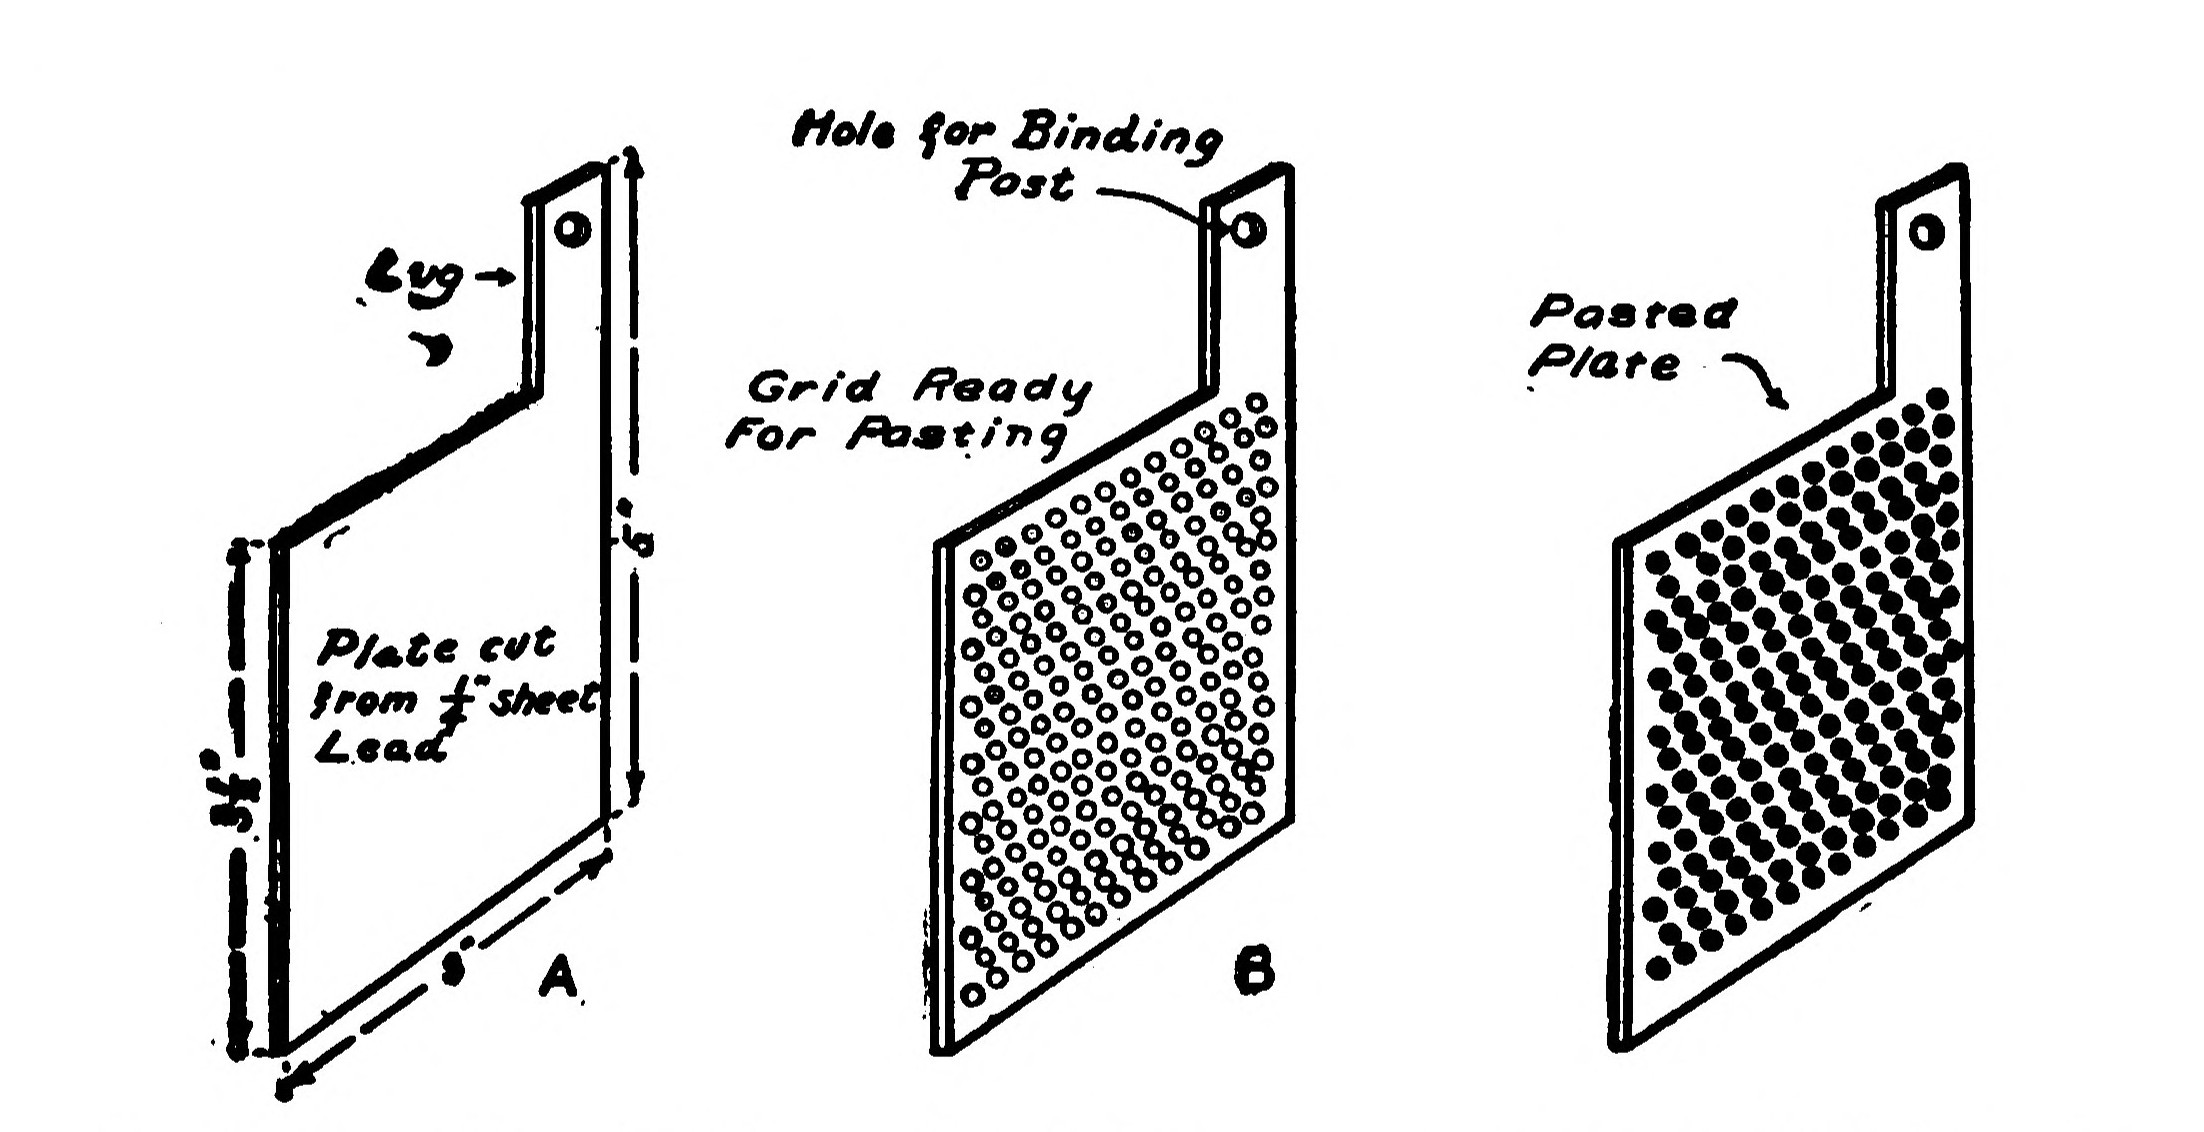 FIG. 39.—Showing how the Plates for a Storage Cell may be made from Sheet Lead by boring it full of holes and filling with paste.